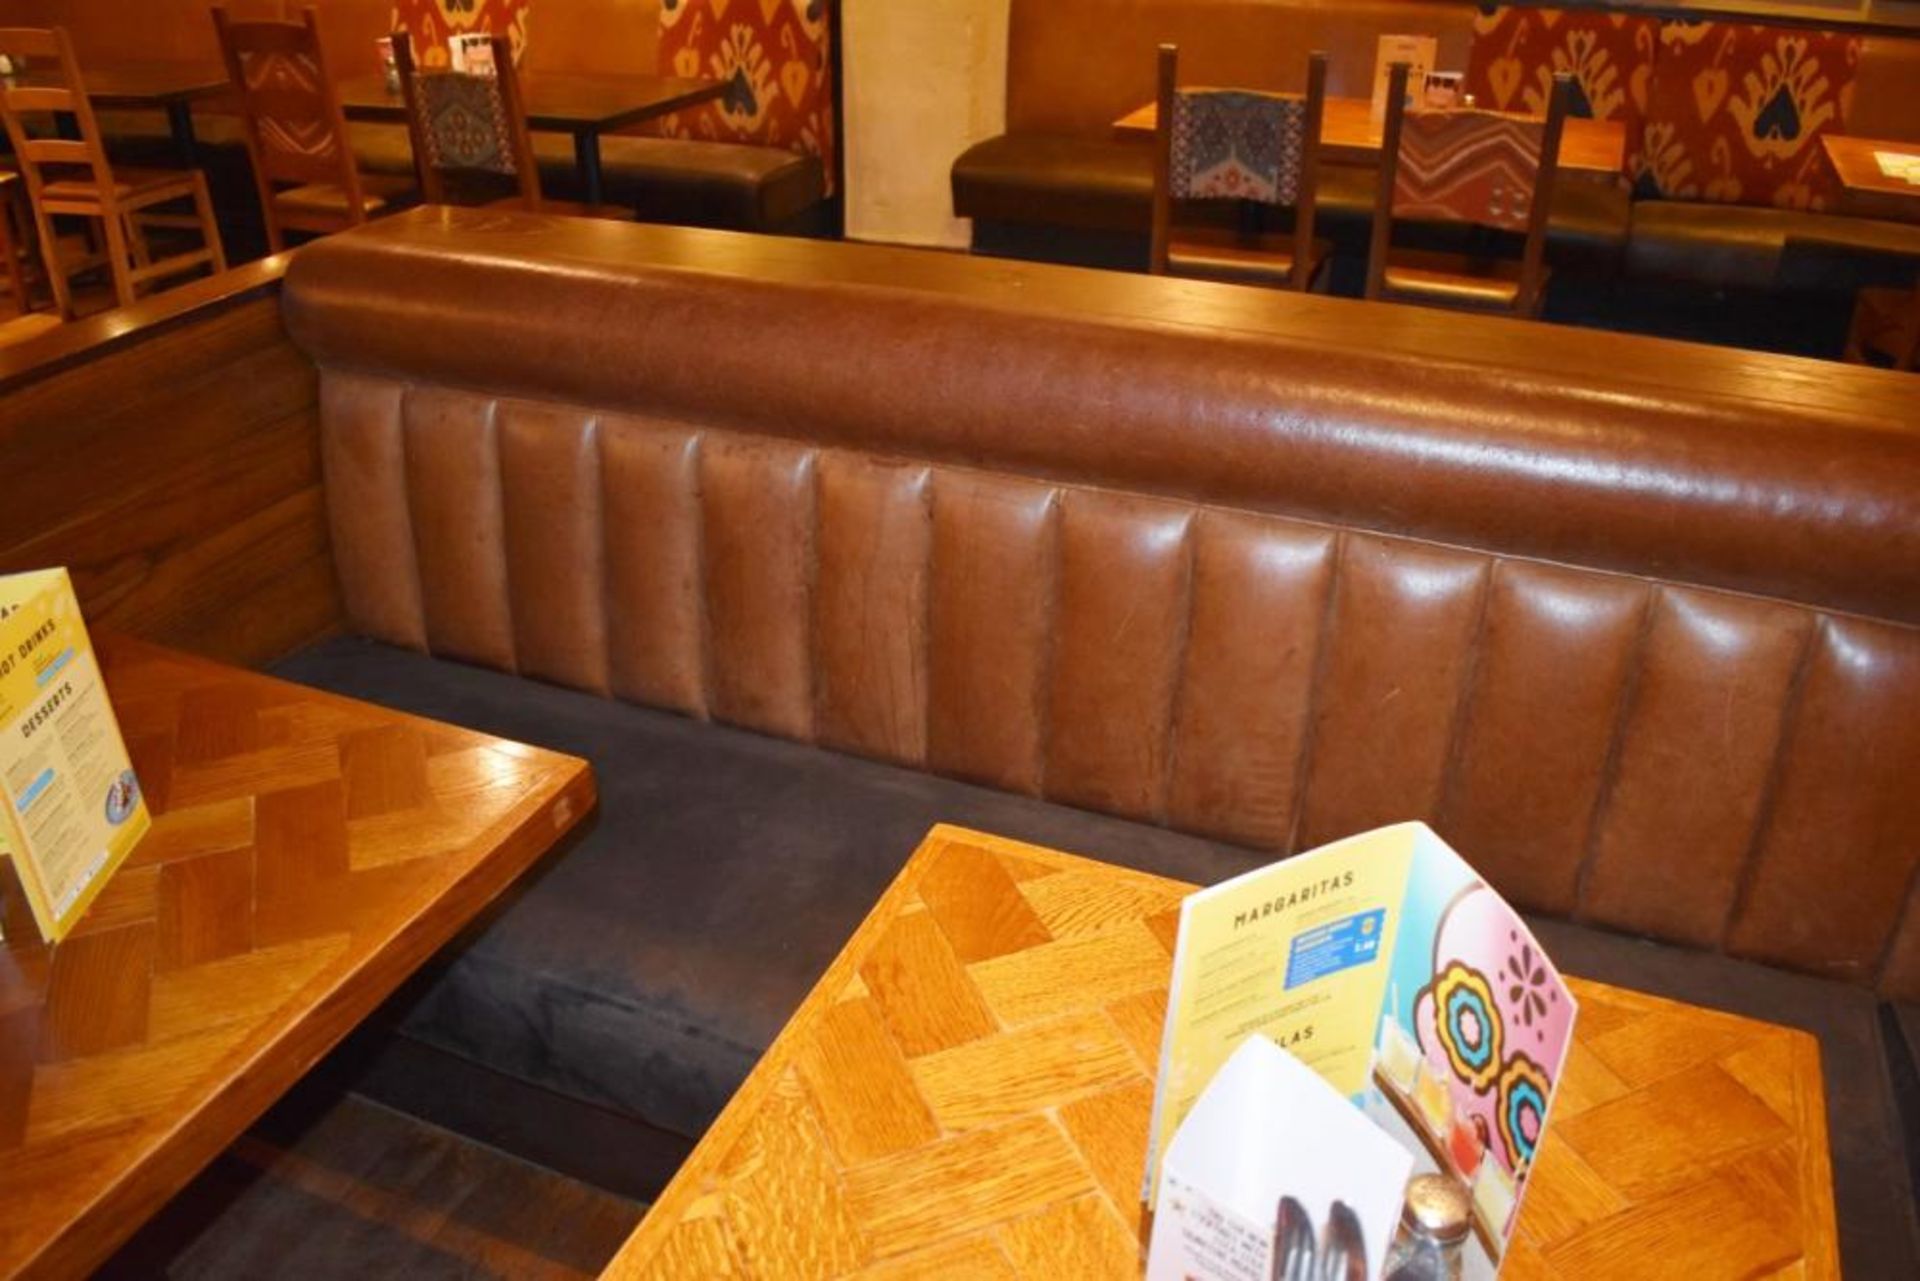 1 x Long Curved Seating Bench From Mexican Themed Restaurant - CL461 - Ref PR891 - Location: London - Image 12 of 14